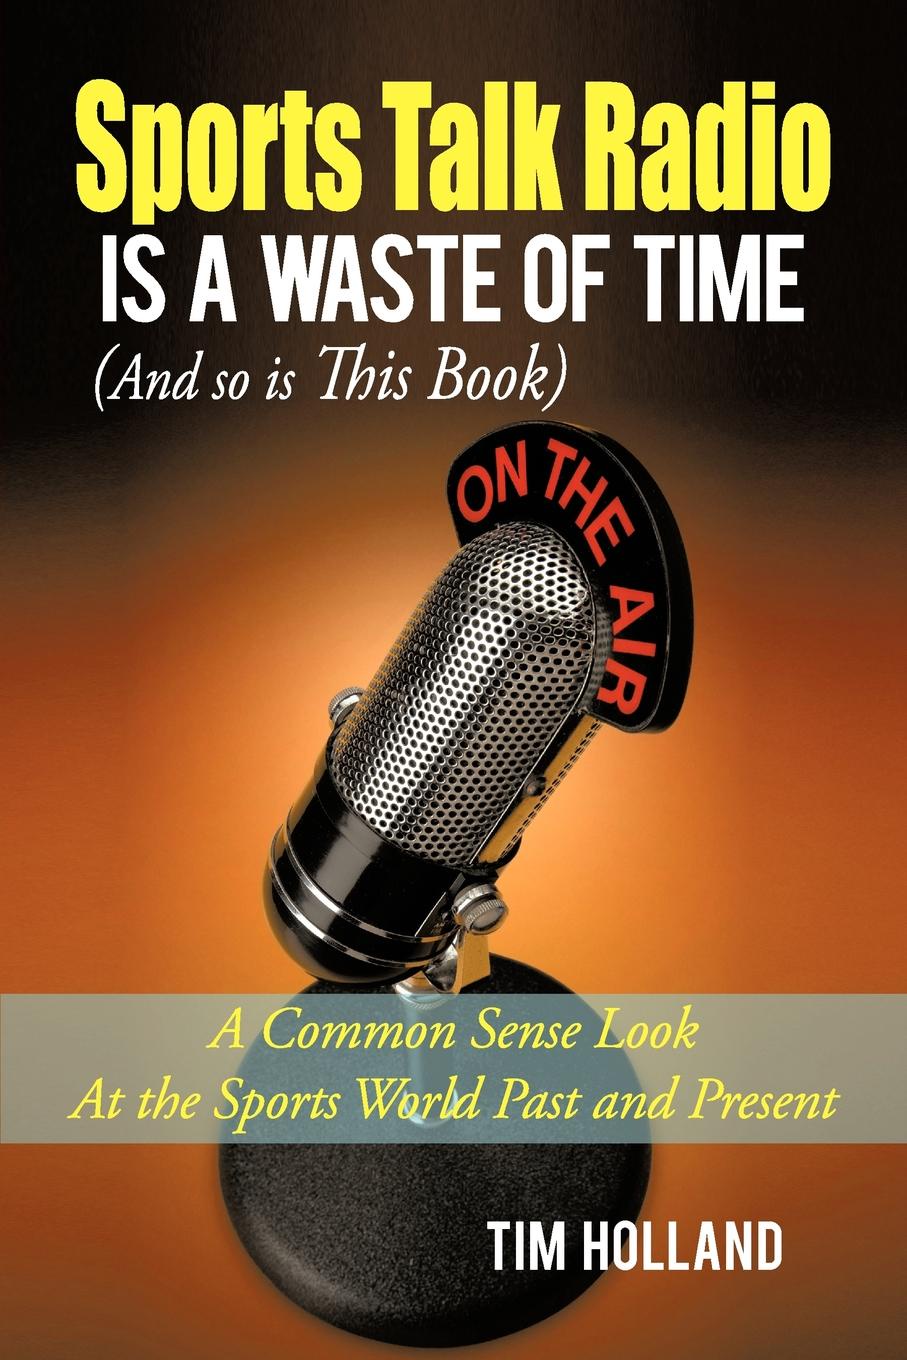 Sports Talk Radio Is A Waste of Time (And so is This Book). A Common Sense Look At the Sports World Past and Present